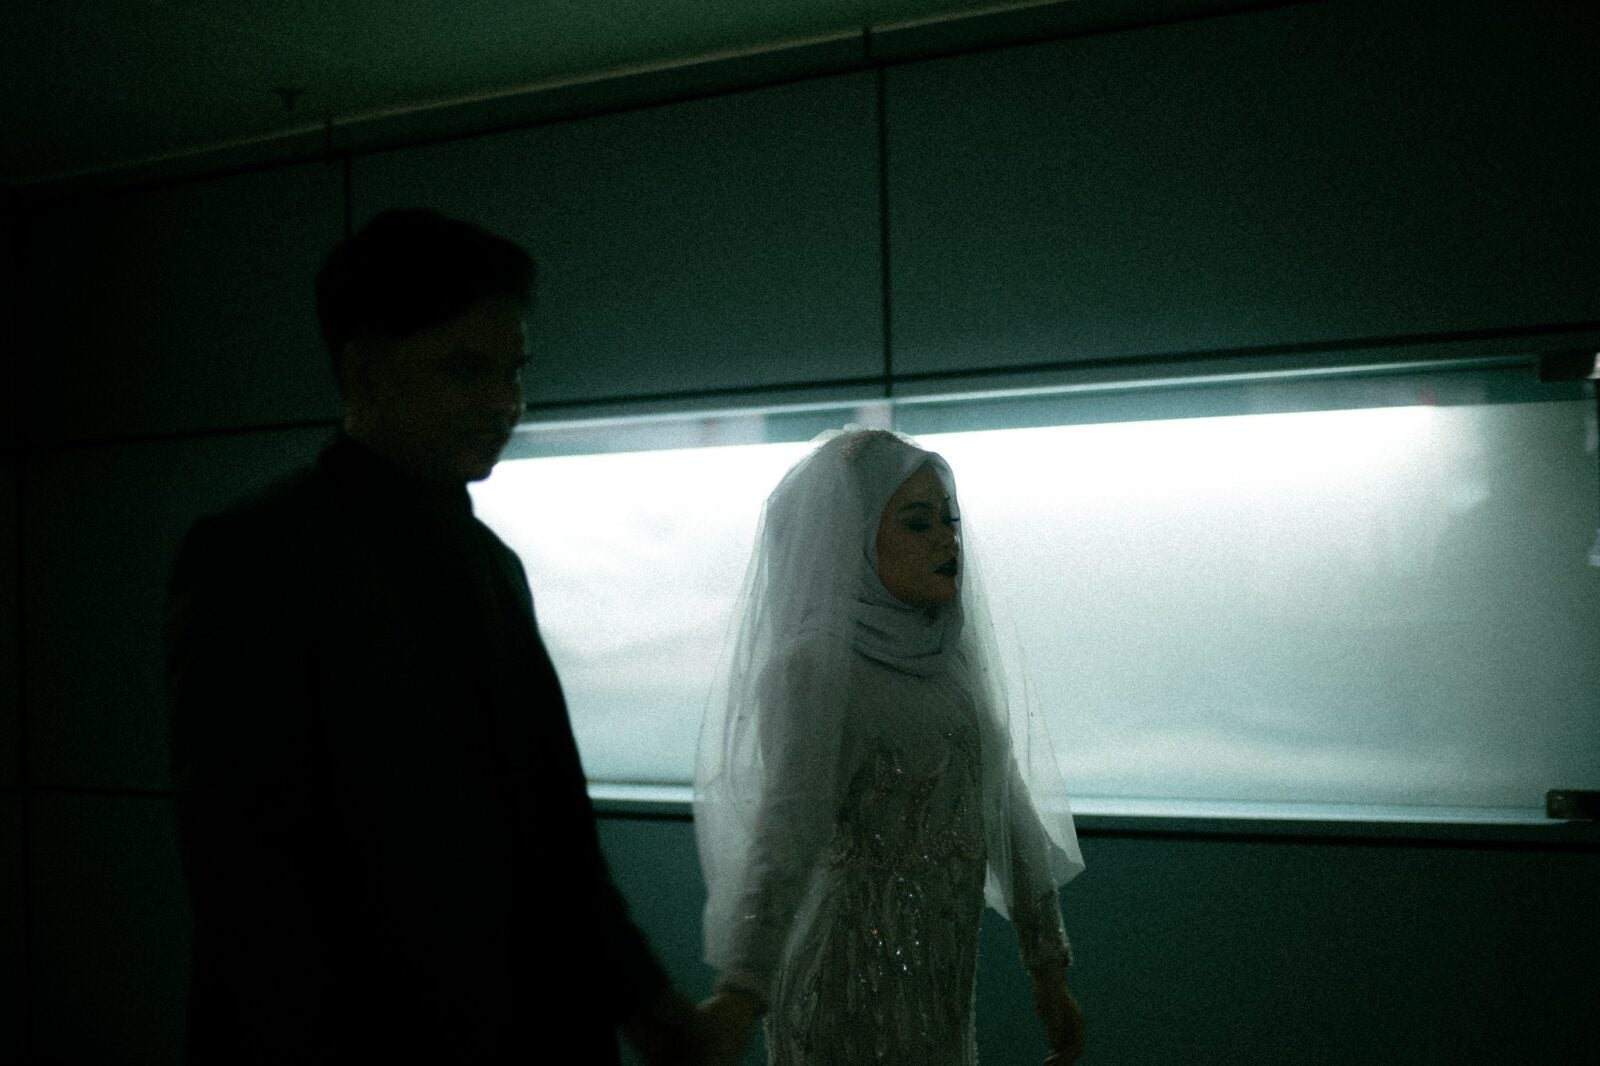 A Malay woman wearing a white wedding dress, white hijab and a white veil walks alongside her husband who is casted in a shadow along a white lit hallway.